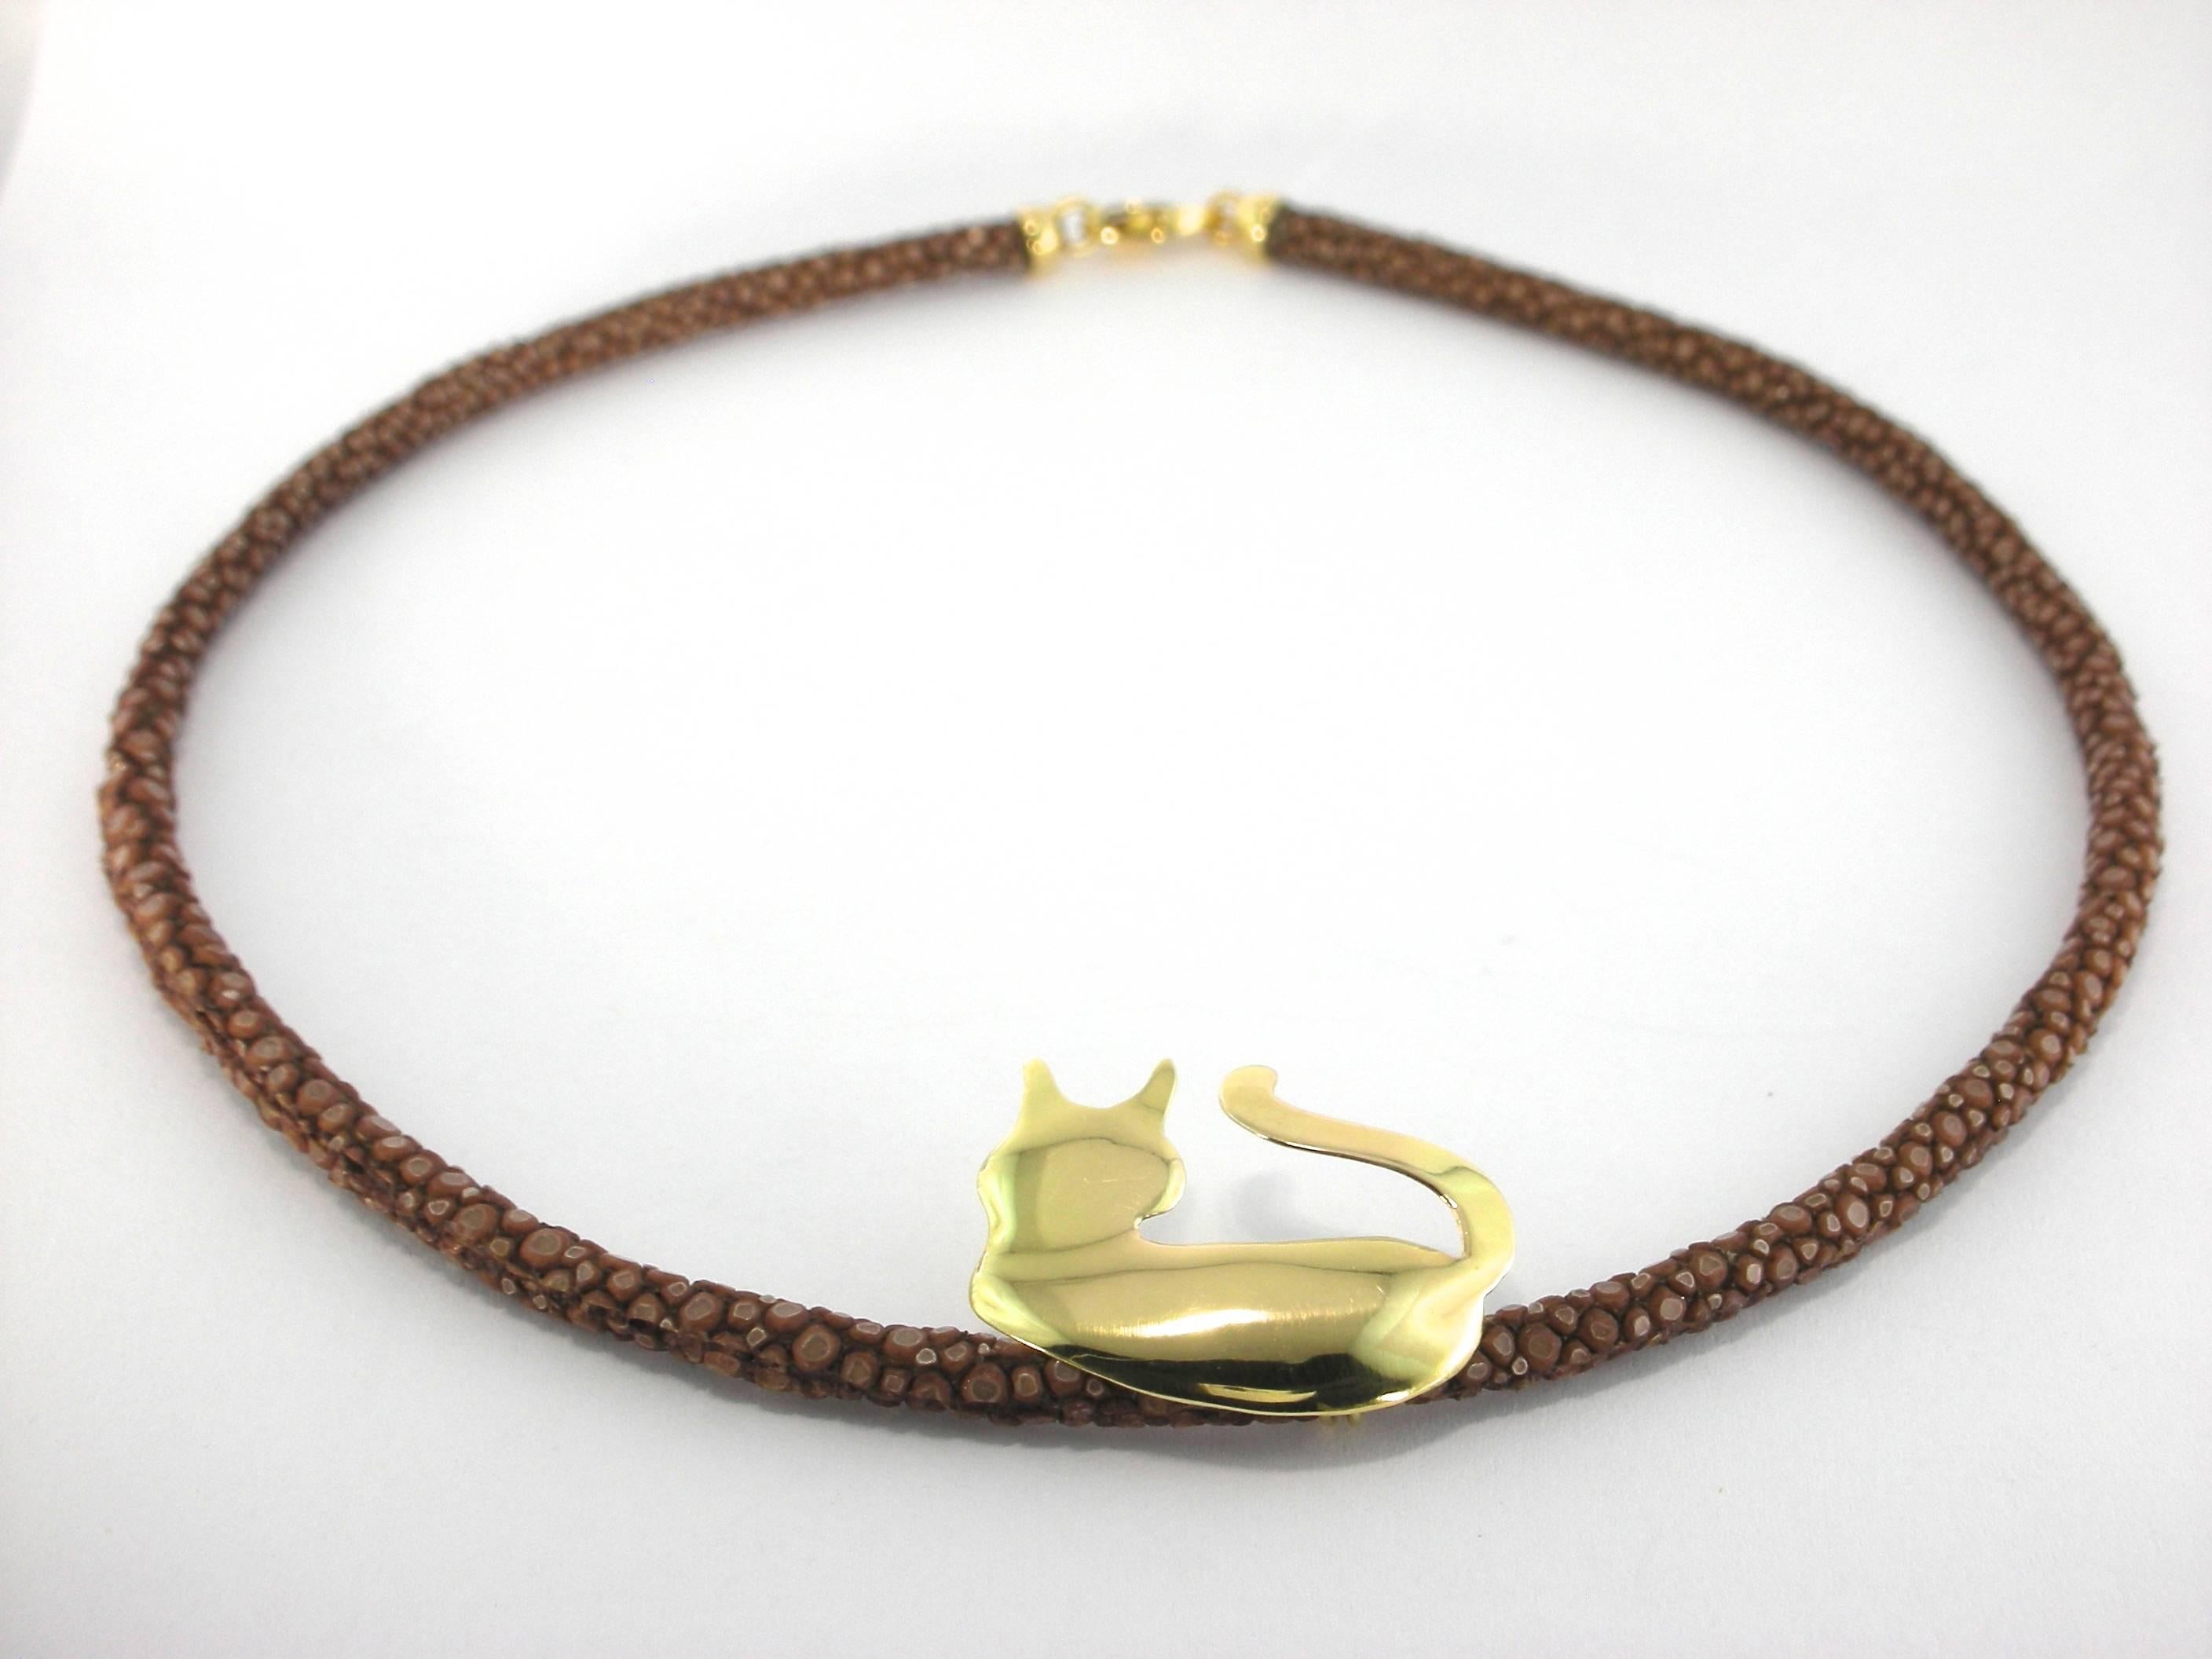 Jona design collection, hand crafted in Italy,18 karat yellow gold cat silhouette pendant with brown galuchat choker (16 inch long).

All Jona jewelry is new and has never been previously owned or worn. Each item will arrive at your door beautifully